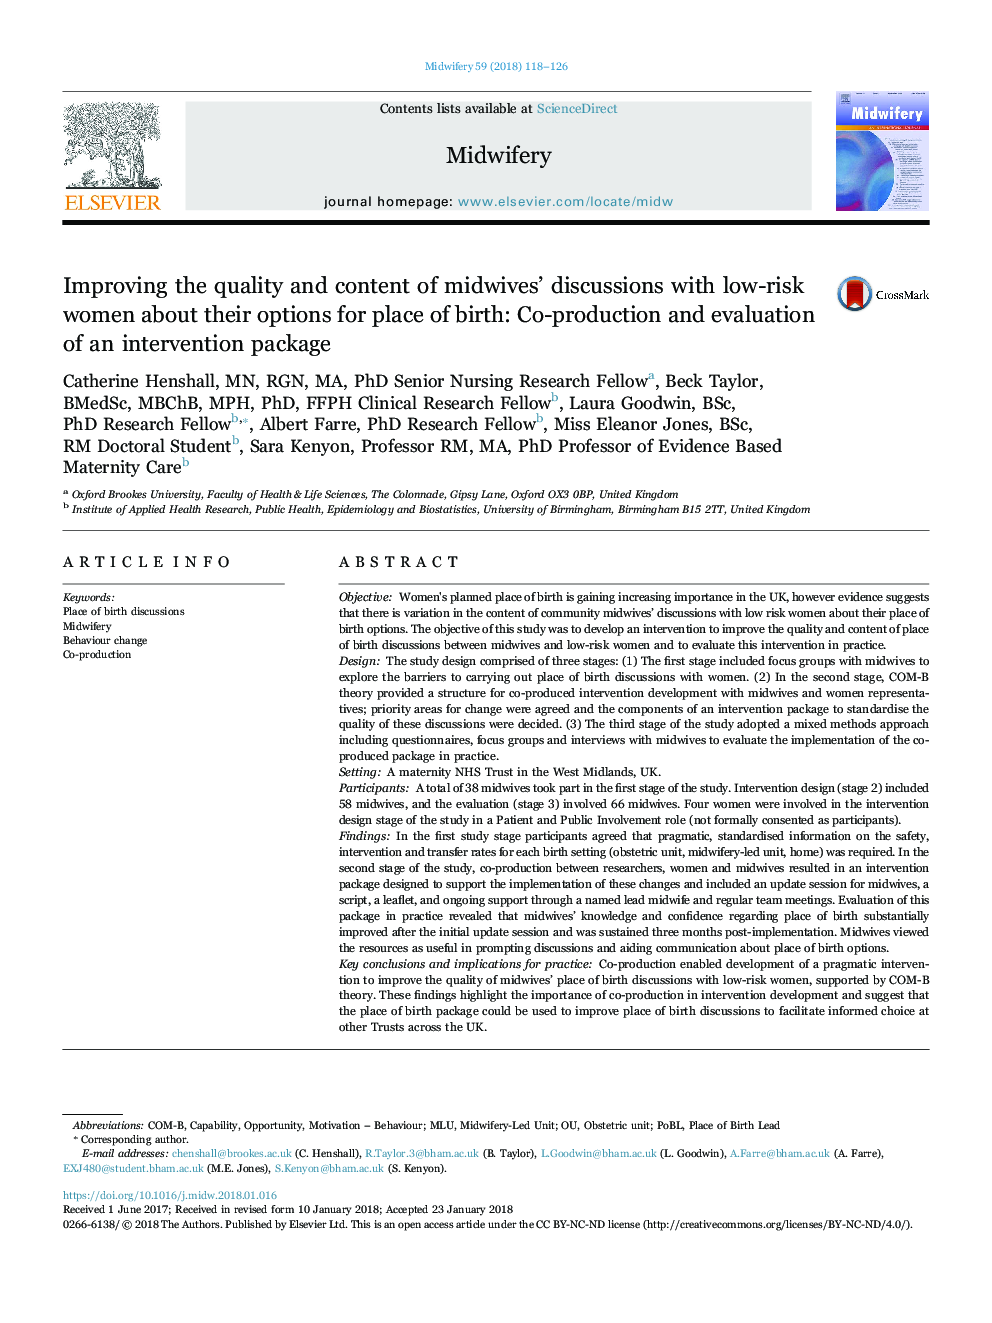 Improving the quality and content of midwives' discussions with low-risk women about their options for place of birth: Co-production and evaluation of an intervention package